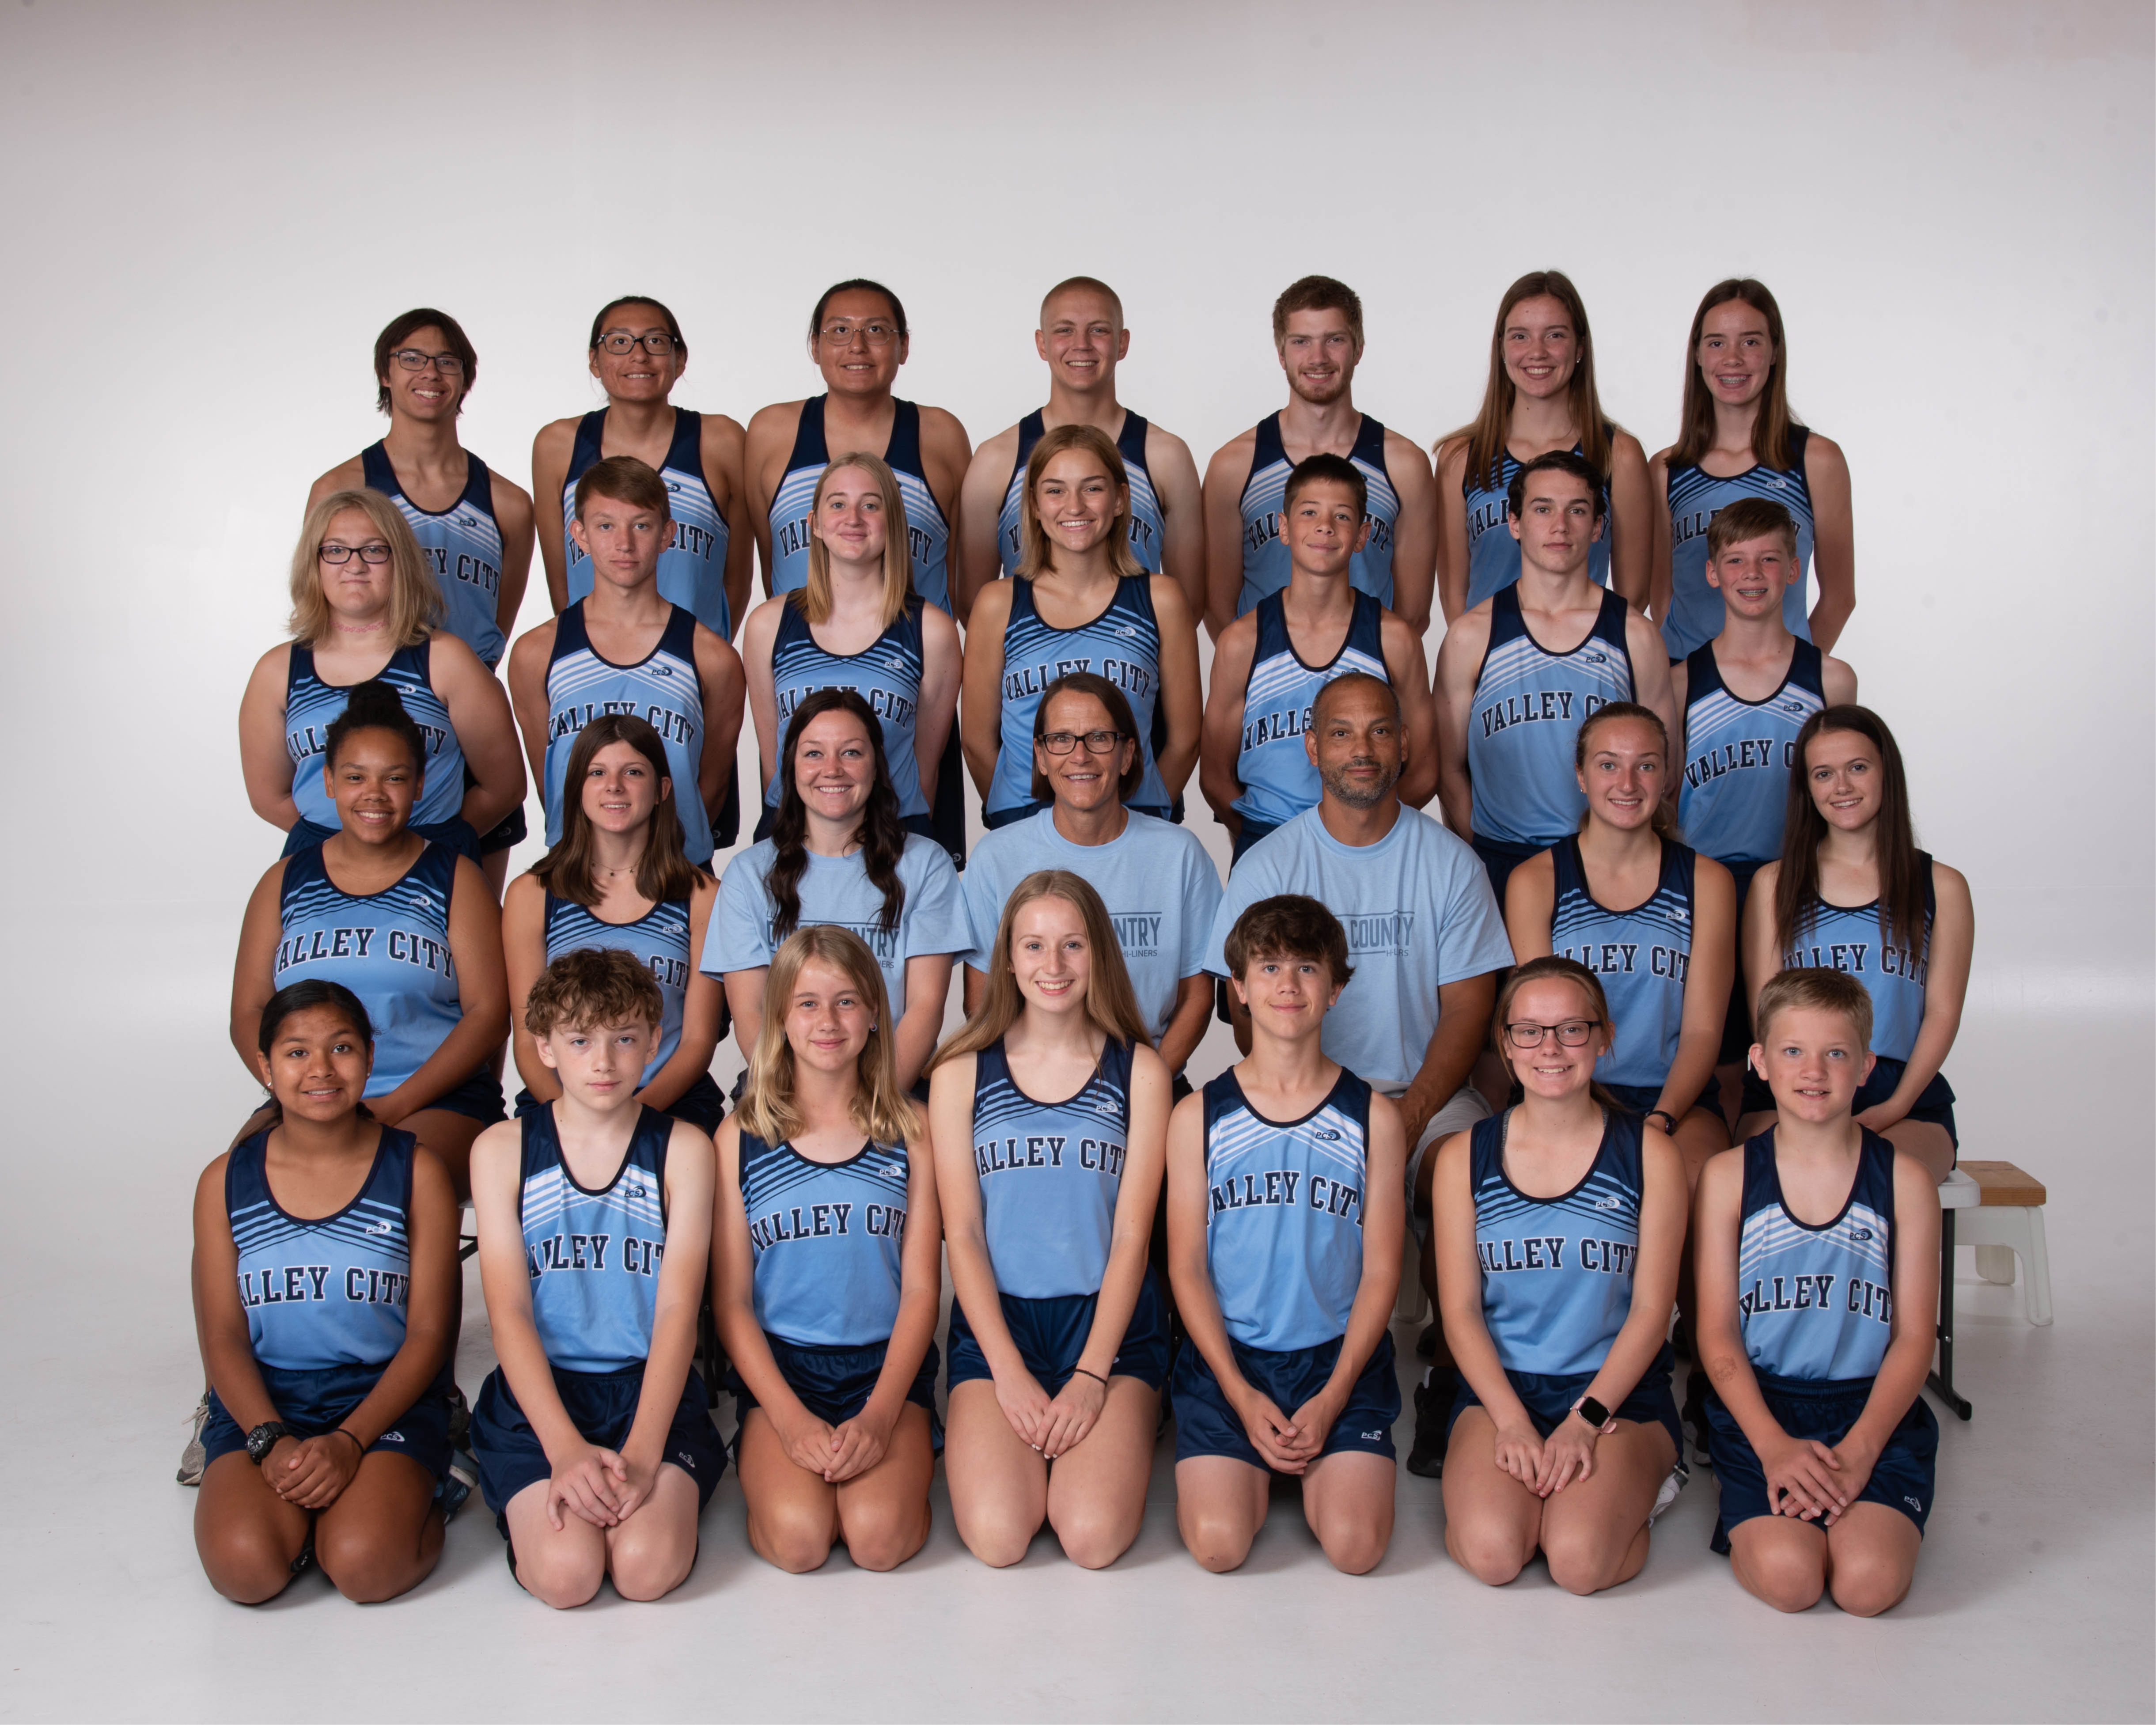 Valley City Cross Country team picture with coaches